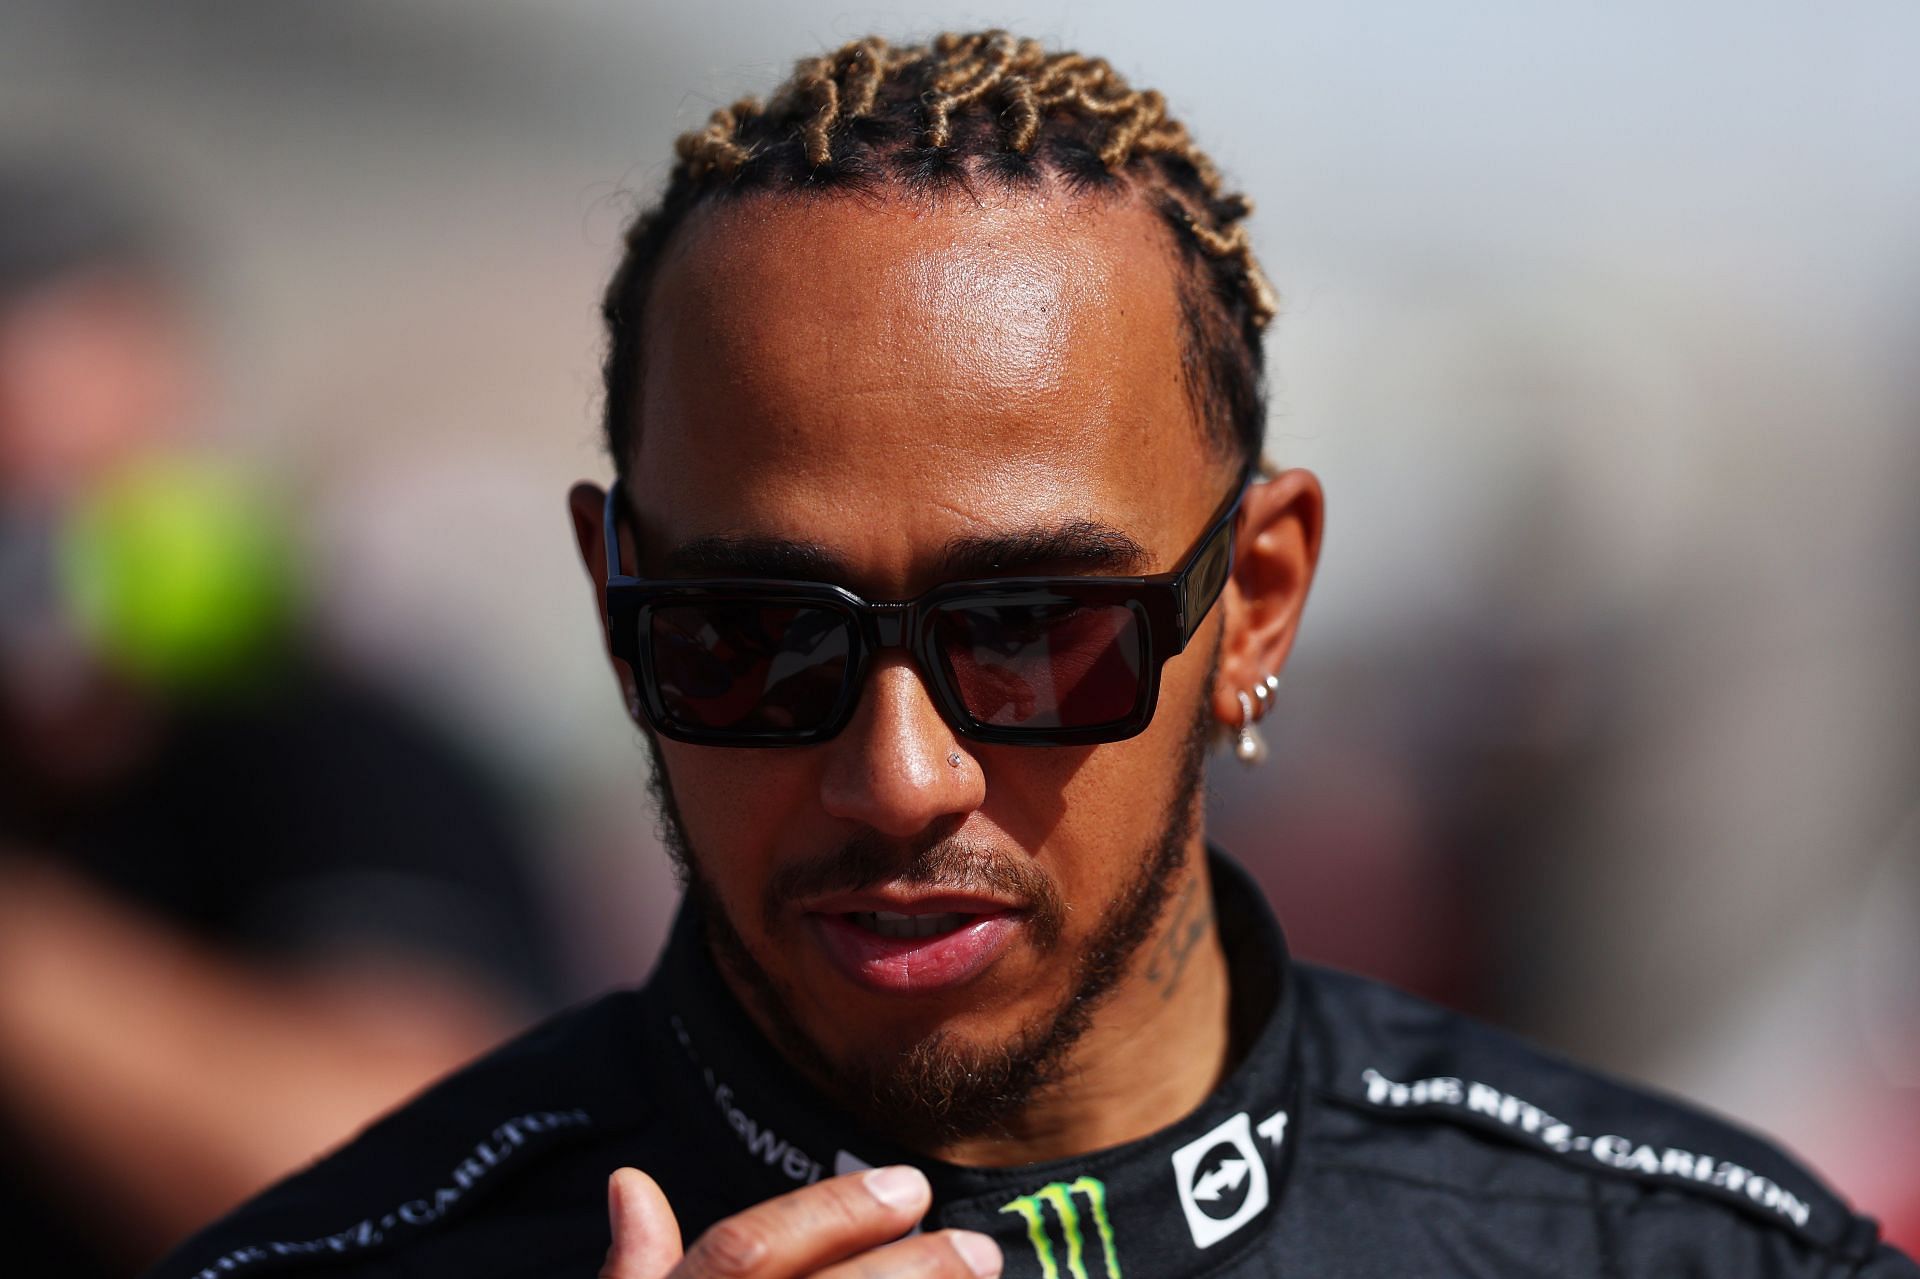 Lewis Hamilton in the F1 paddock in Bahrain (Photo by Lars Baron/Getty Images)